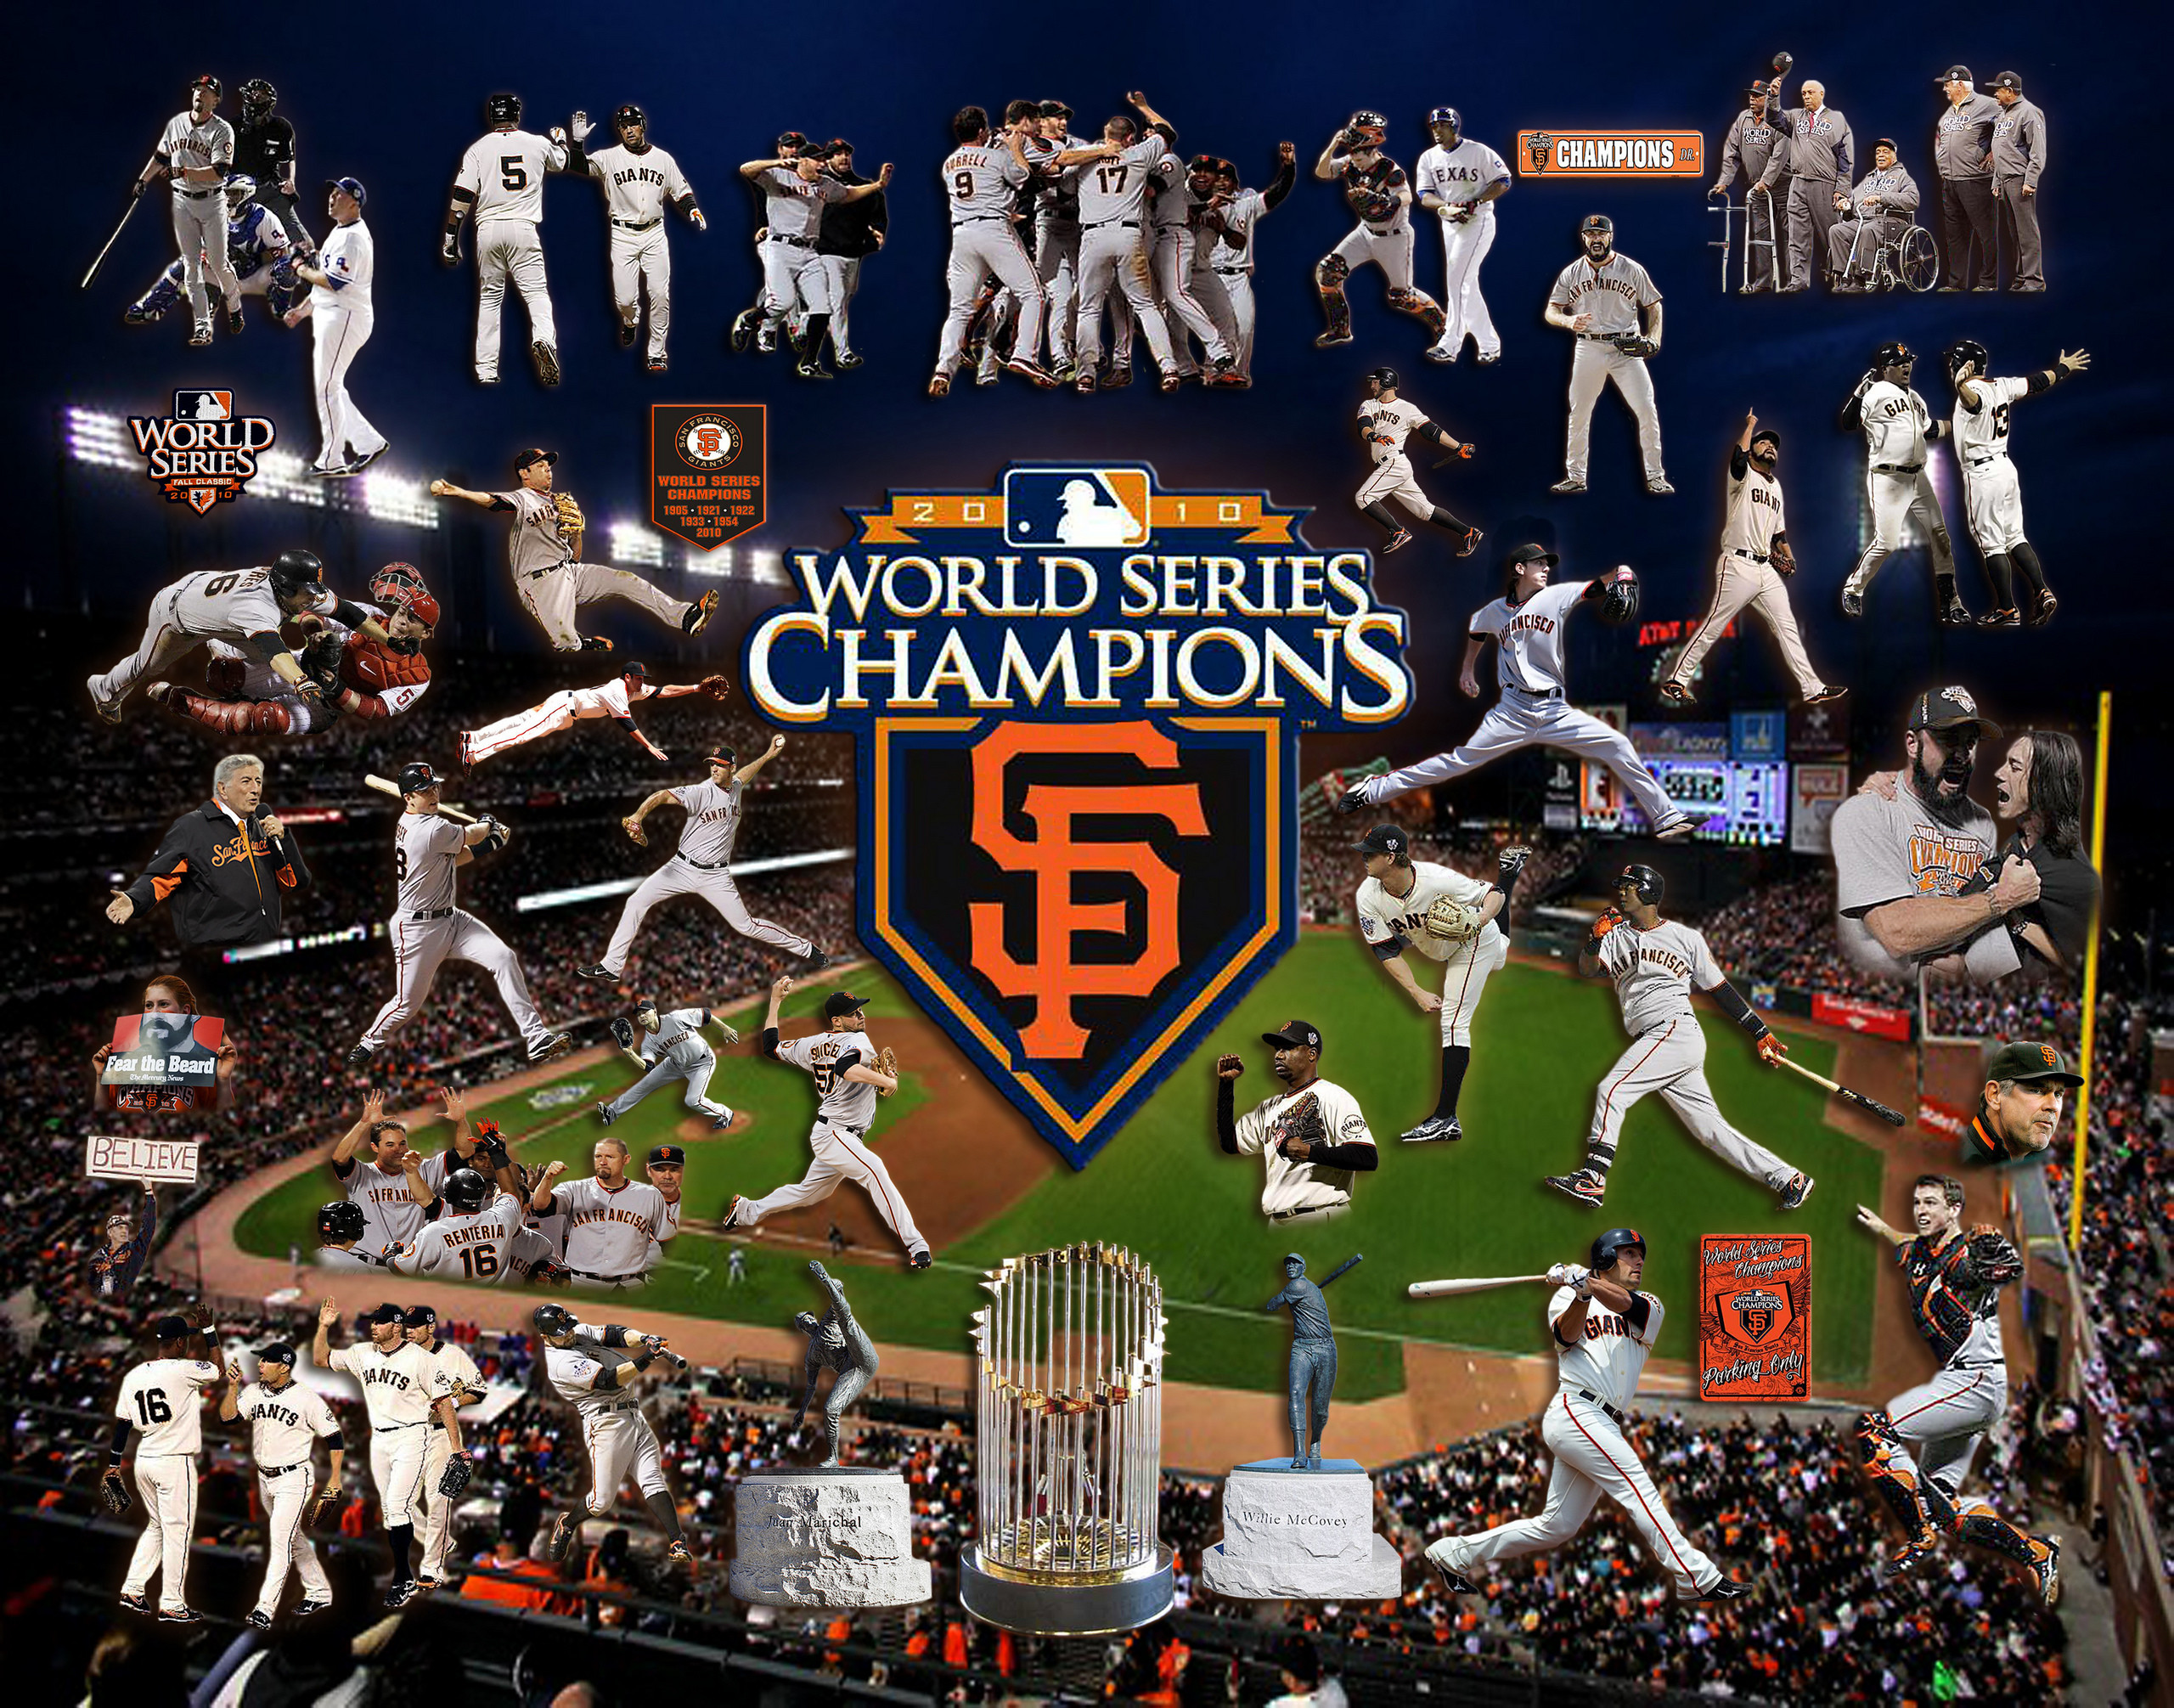 2560x2011 San Francisco Giants images World Series Champions HD wallpaper and  background photos